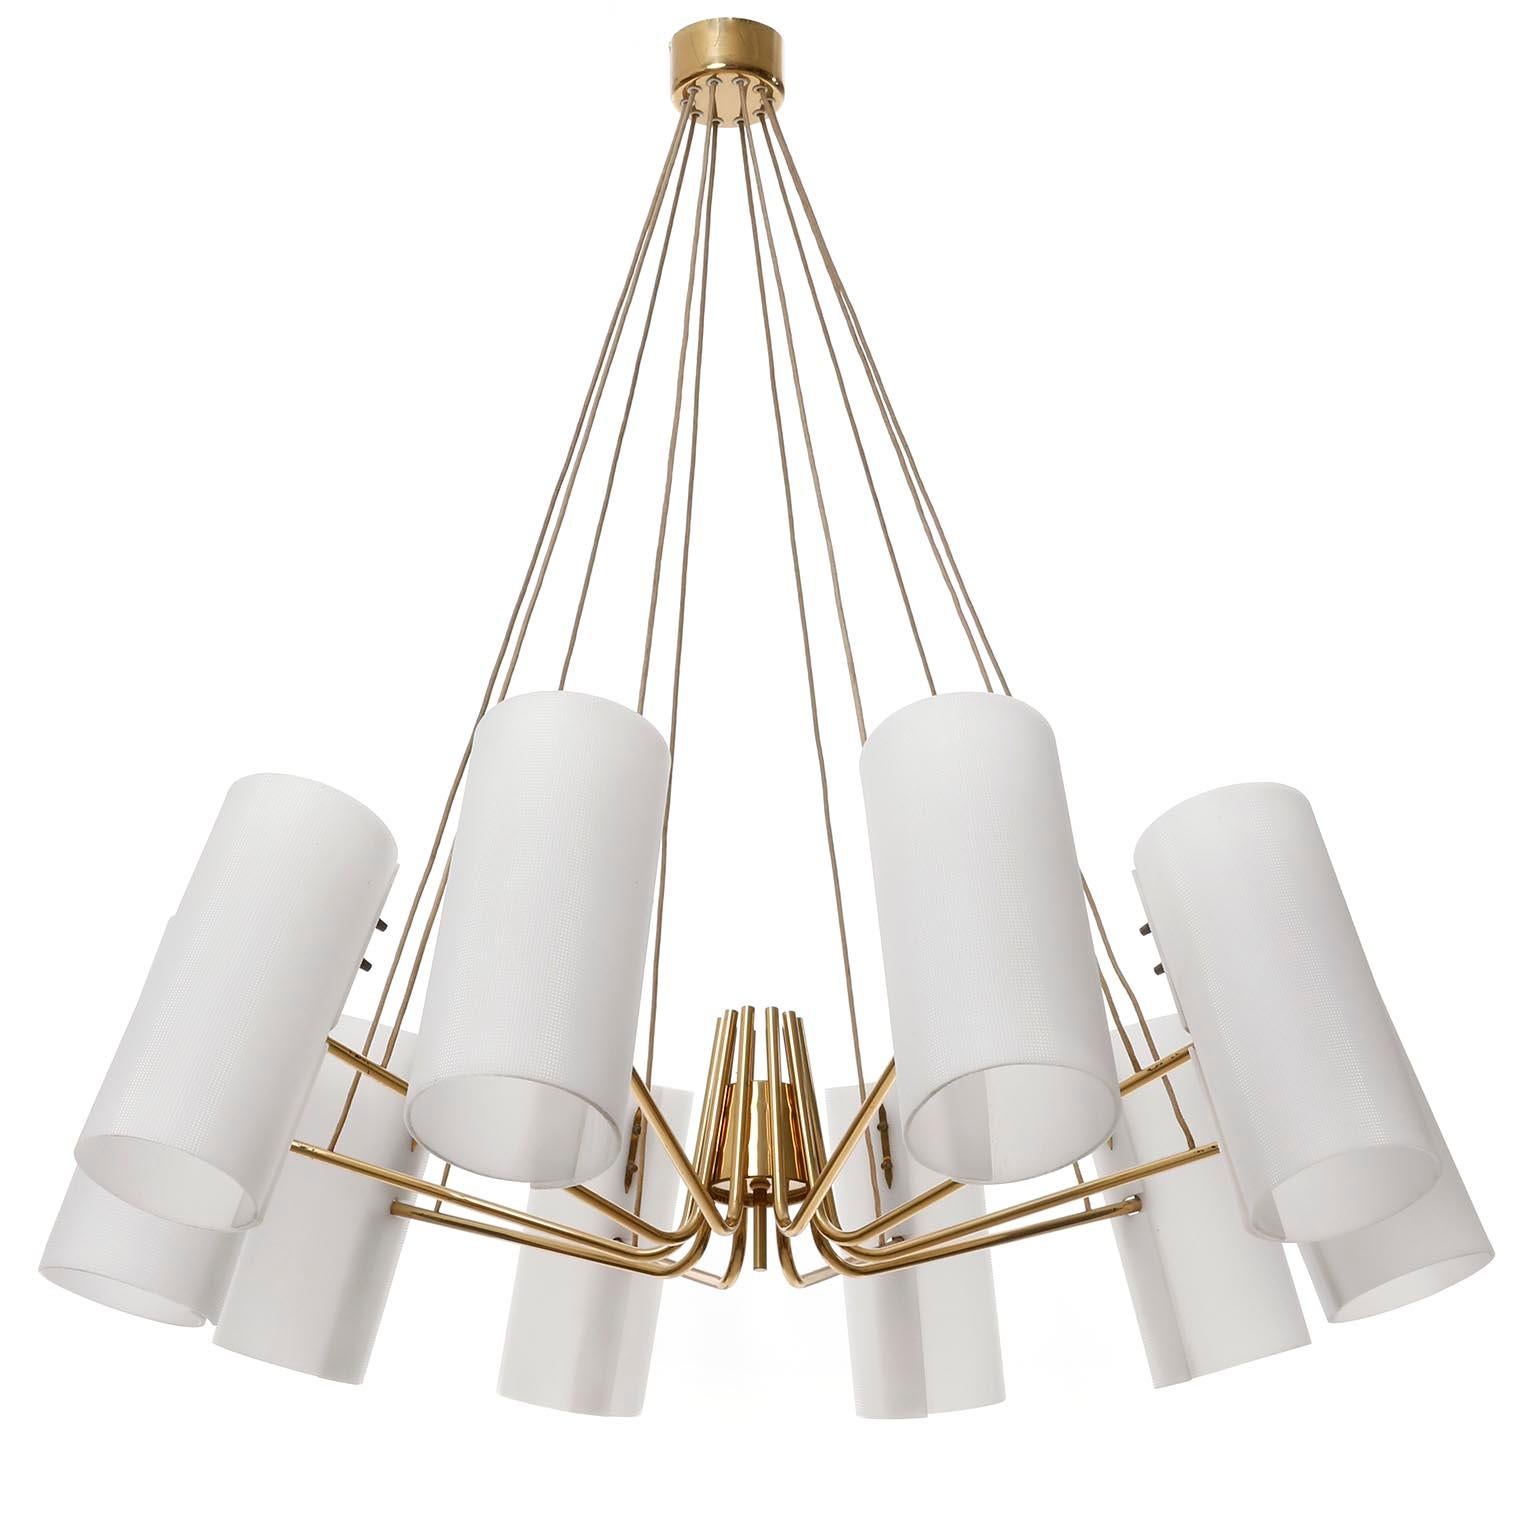 An extra large 10-arm pendant chandelier manufactured in midcentury, crica 1960.
The light fixture is made of a solid, polished brass frame with curved arms suspended on cords from the ceiling canopy.
Each arm has one socket for a medium or standard